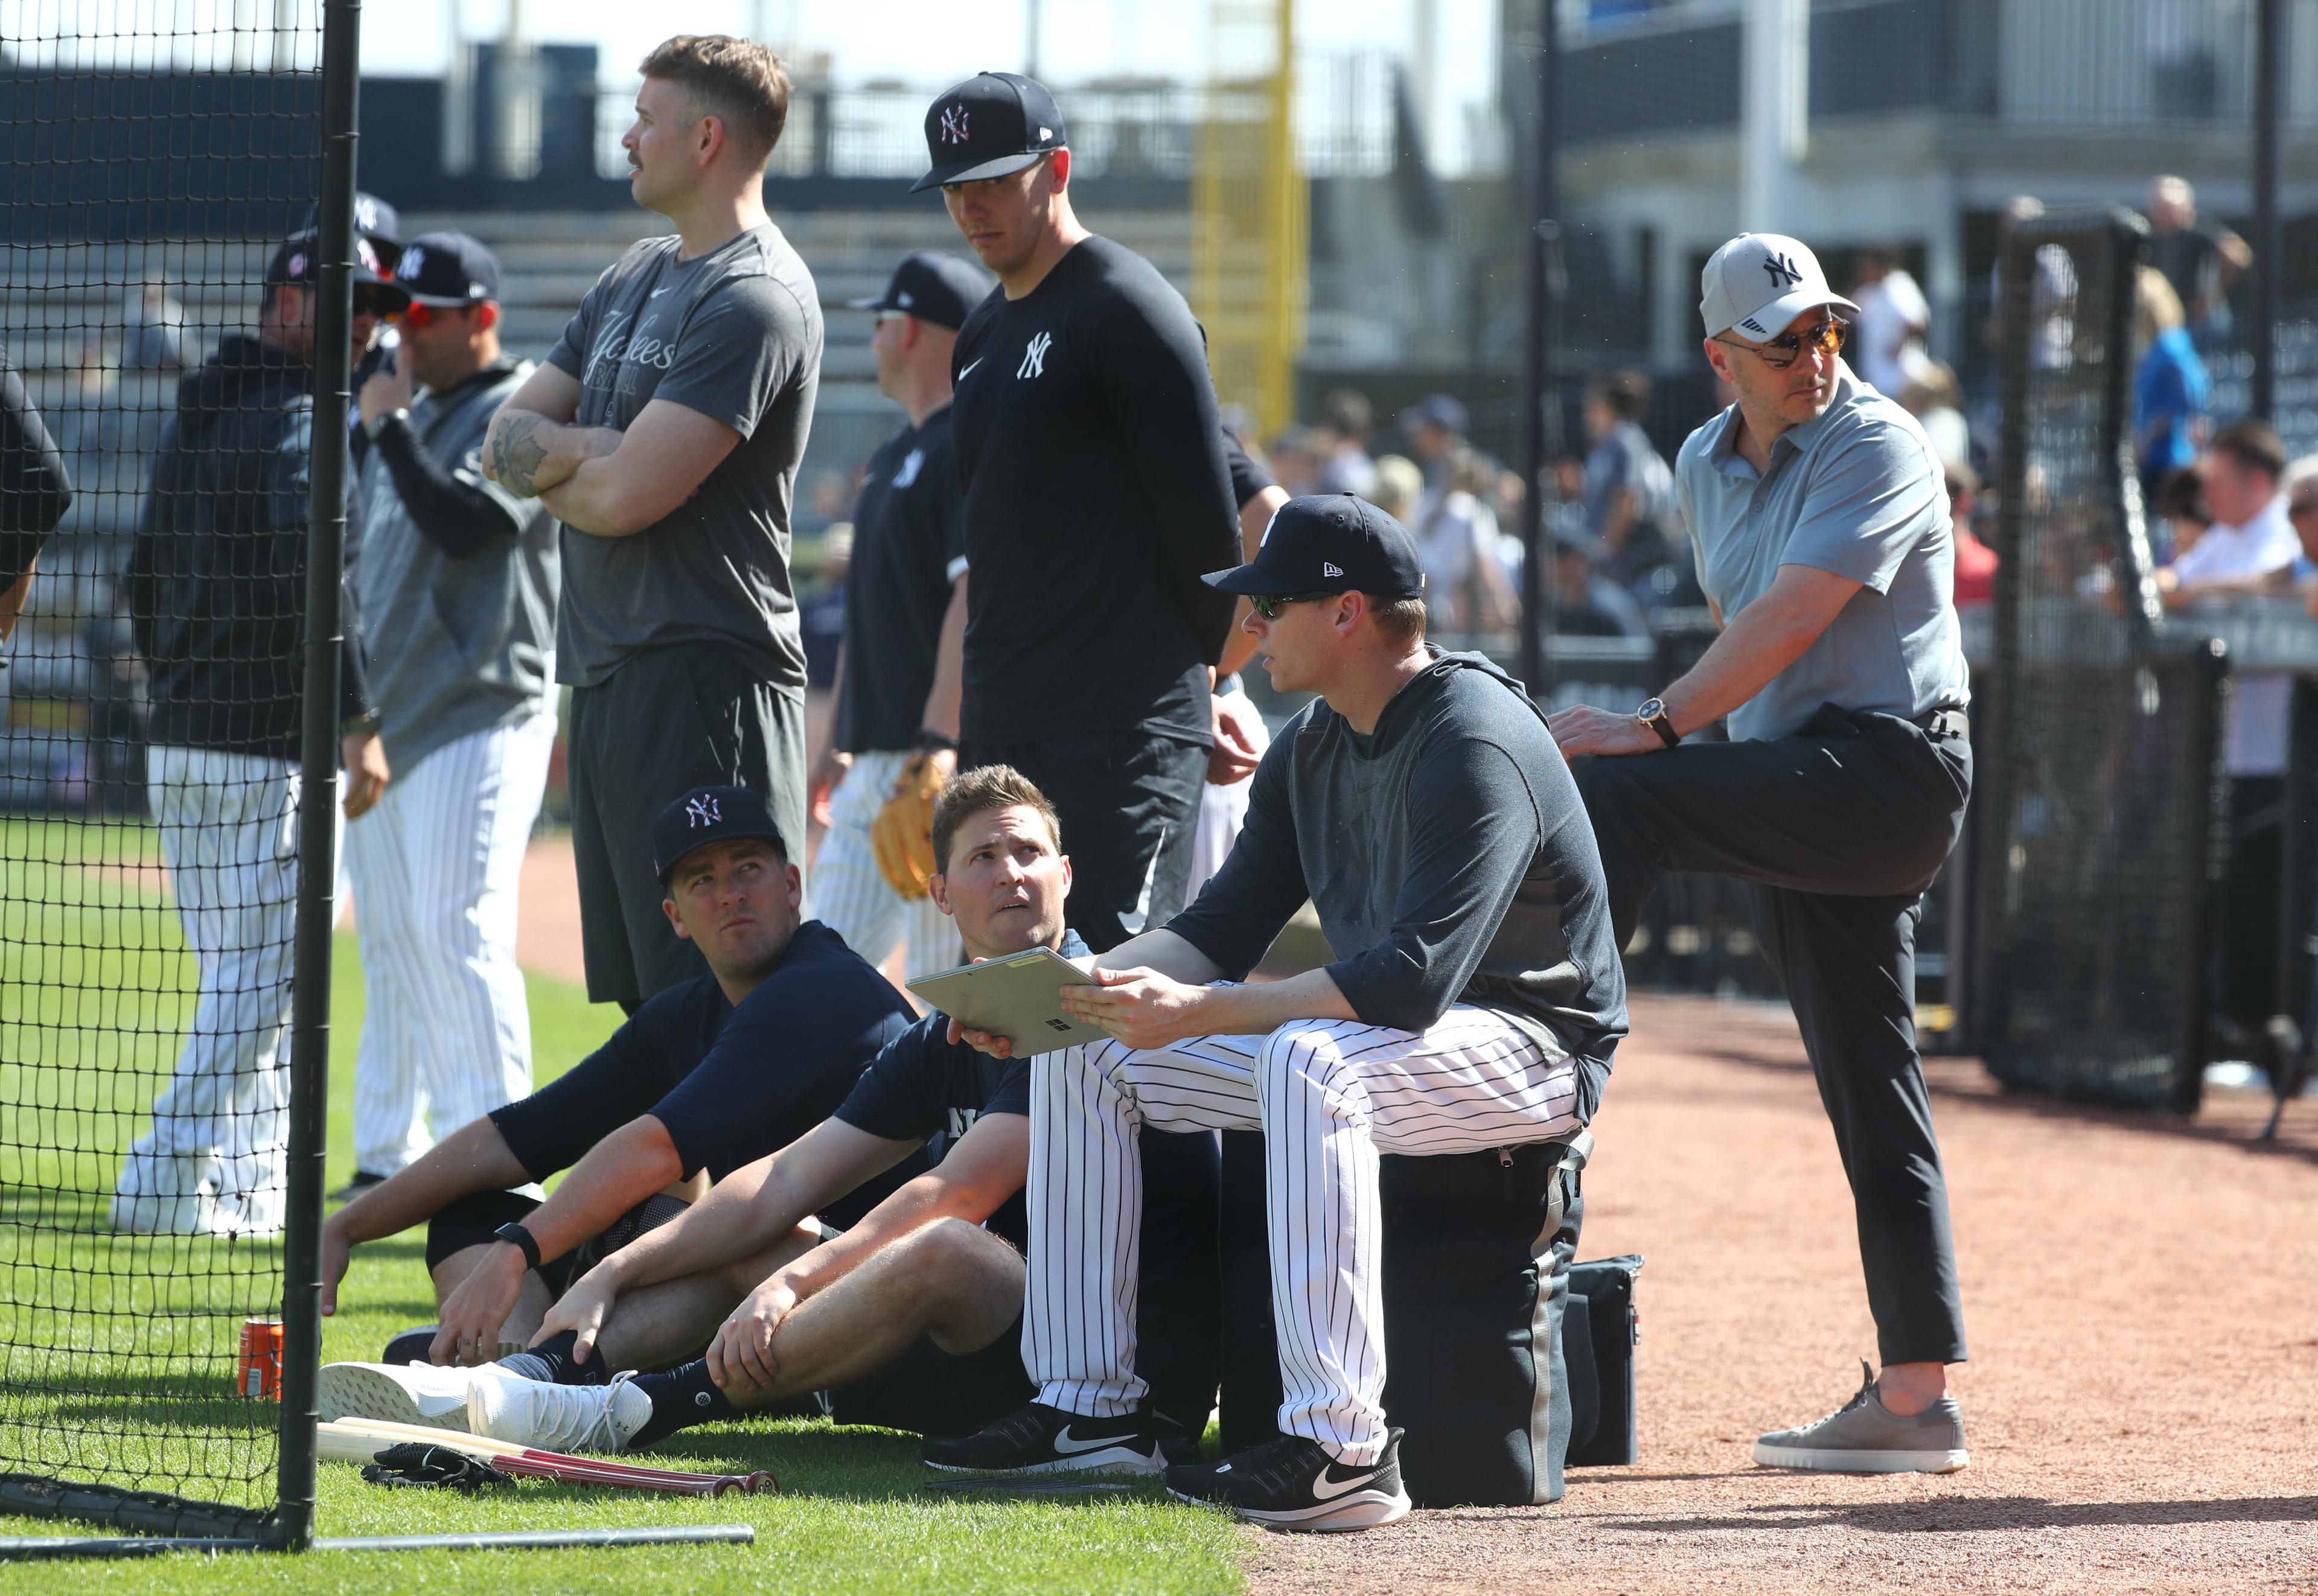 Feb 16, 2020; Tampa, Florida, USA; New York Yankees relief pitcher Zack Britton (53), New York Yankees relief pitcher Chad Green (57), New York Yankees starting pitcher James Paxton (65), general manager Brian Cashman watch live batting practice during spring training at George M. Steinbrenner Field. Mandatory Credit: Kim Klement-USA TODAY Sports / © Kim Klement-USA TODAY Sports